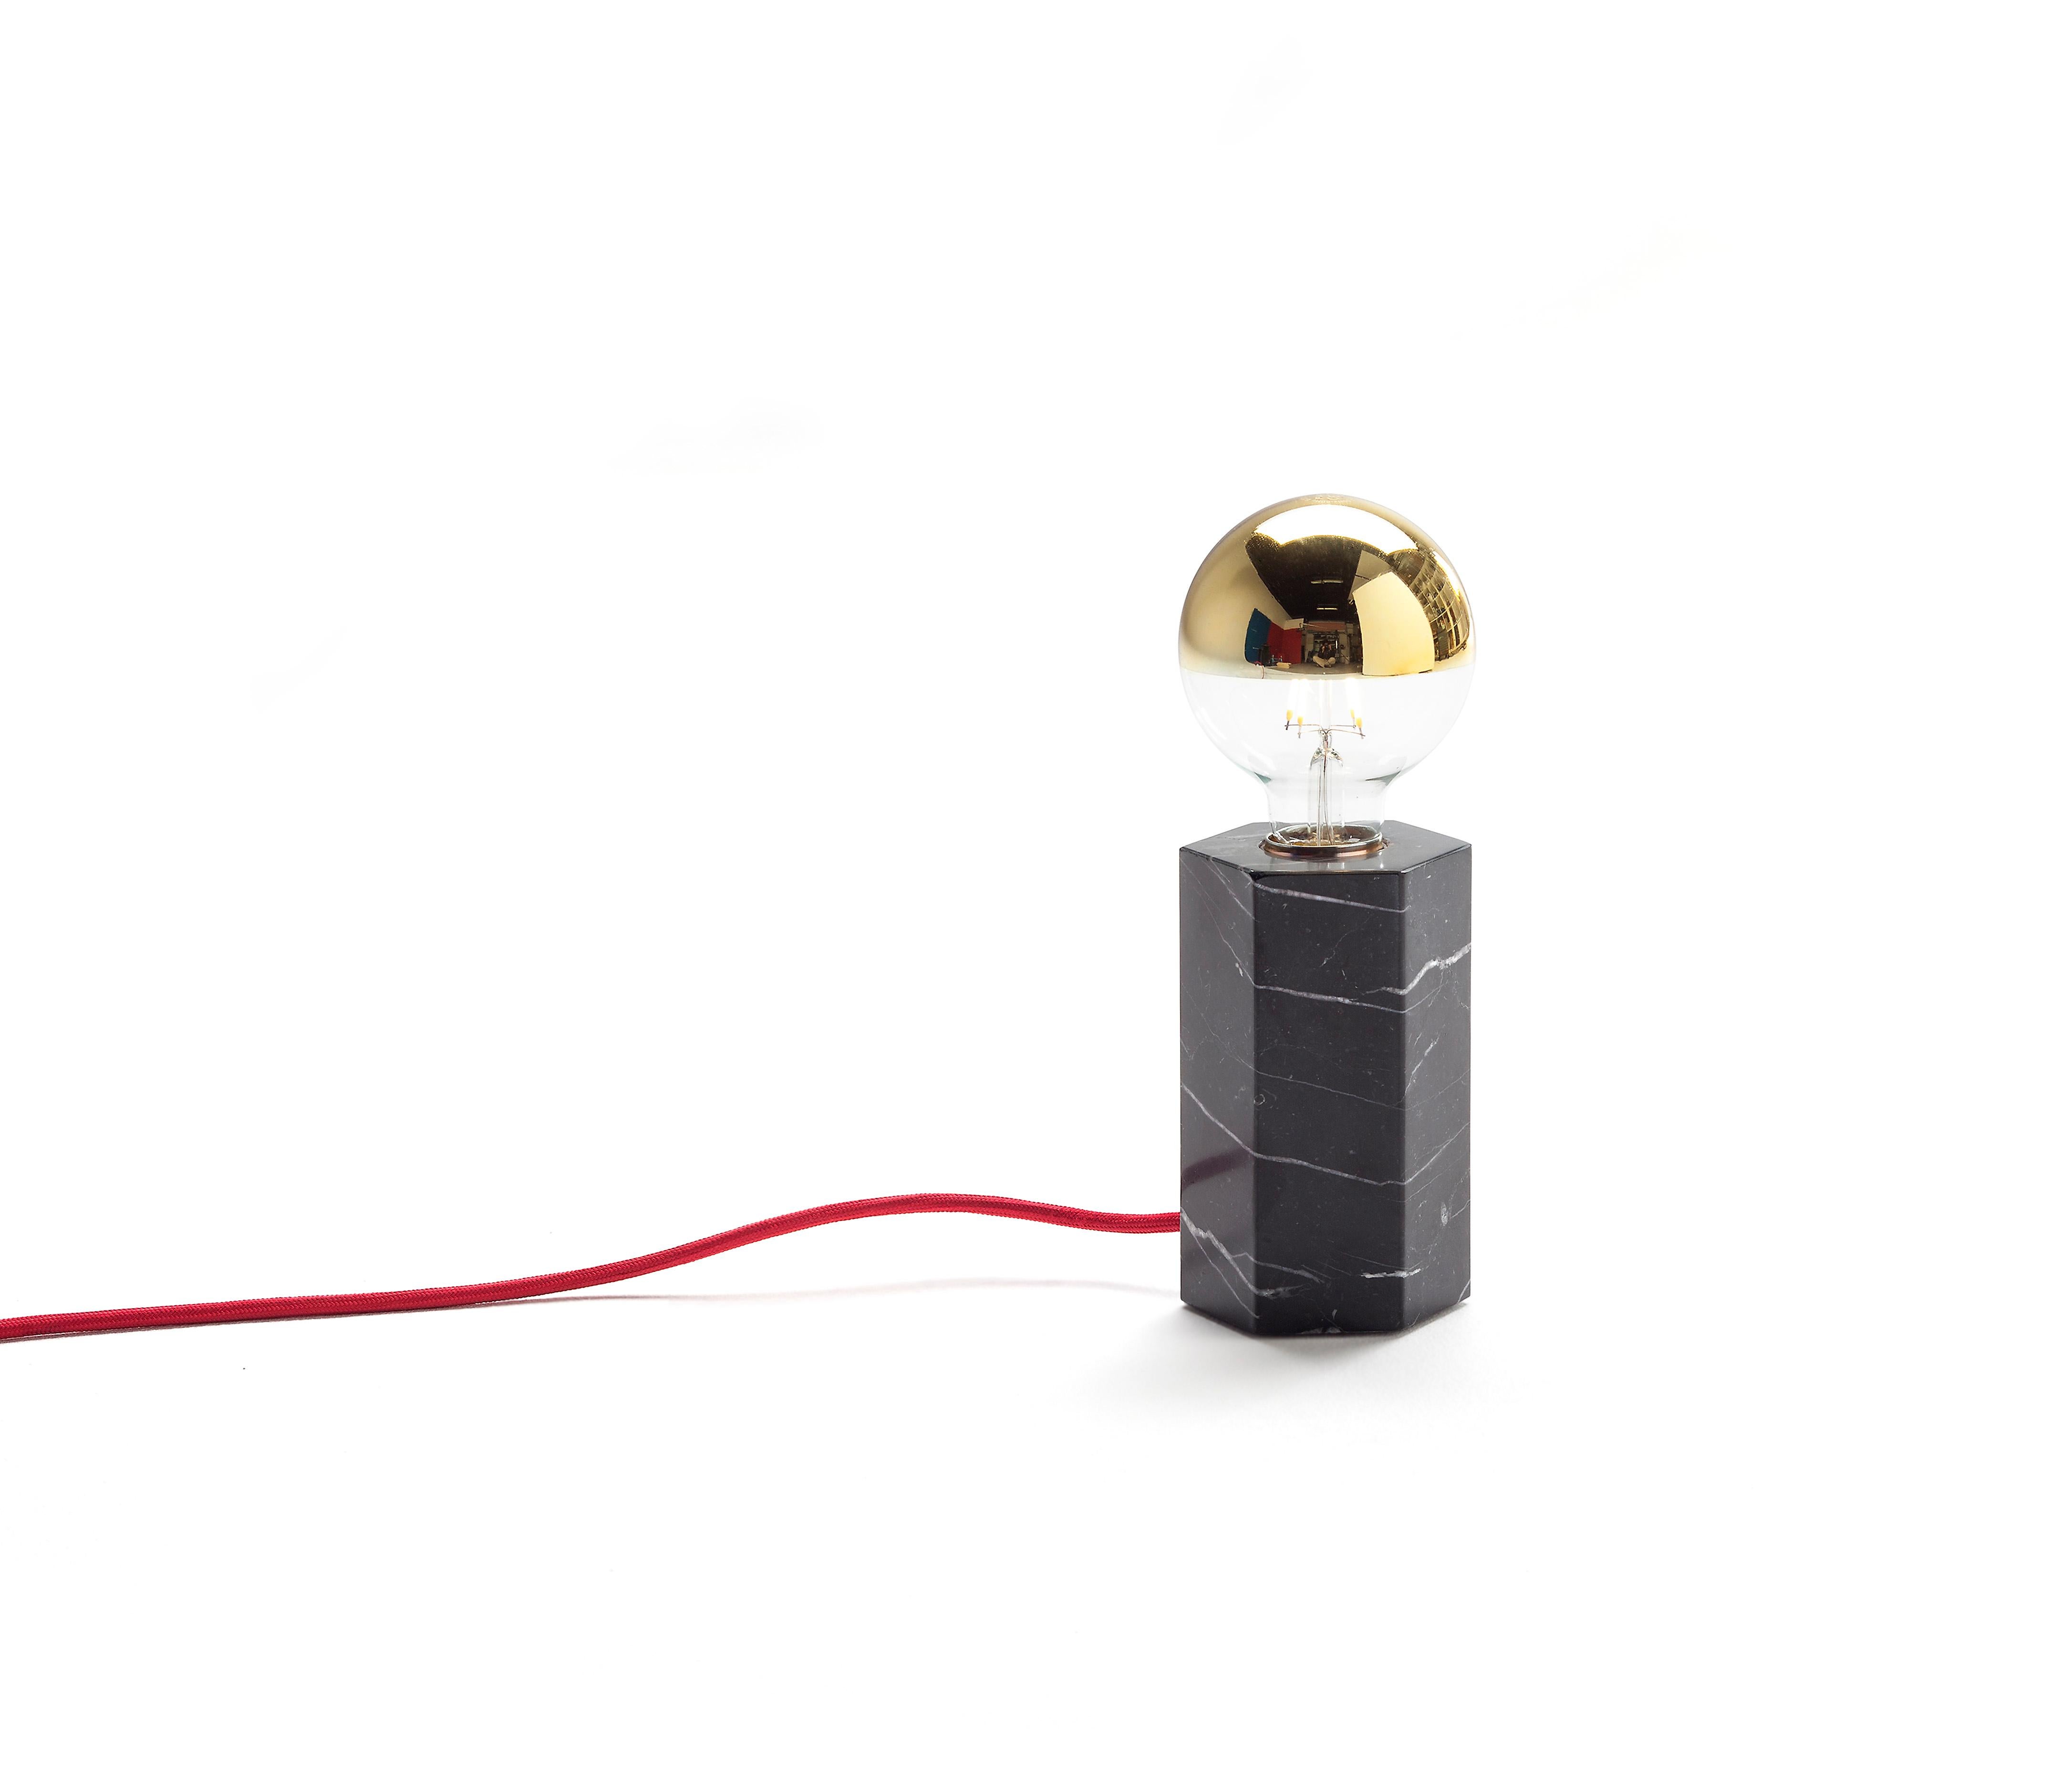 Black hex lamp by Joseph Vila Capdevila
Material: Marquina marble, red cord
Dimensions: 8.5 x 15 x 8.5 cm
 9.5 x 24.5 x 9.5 cm
 Cord 1.5 m
Weight: 2.2 kg 


Aparentment is a space for creation and innovation, experimenting with materials with the